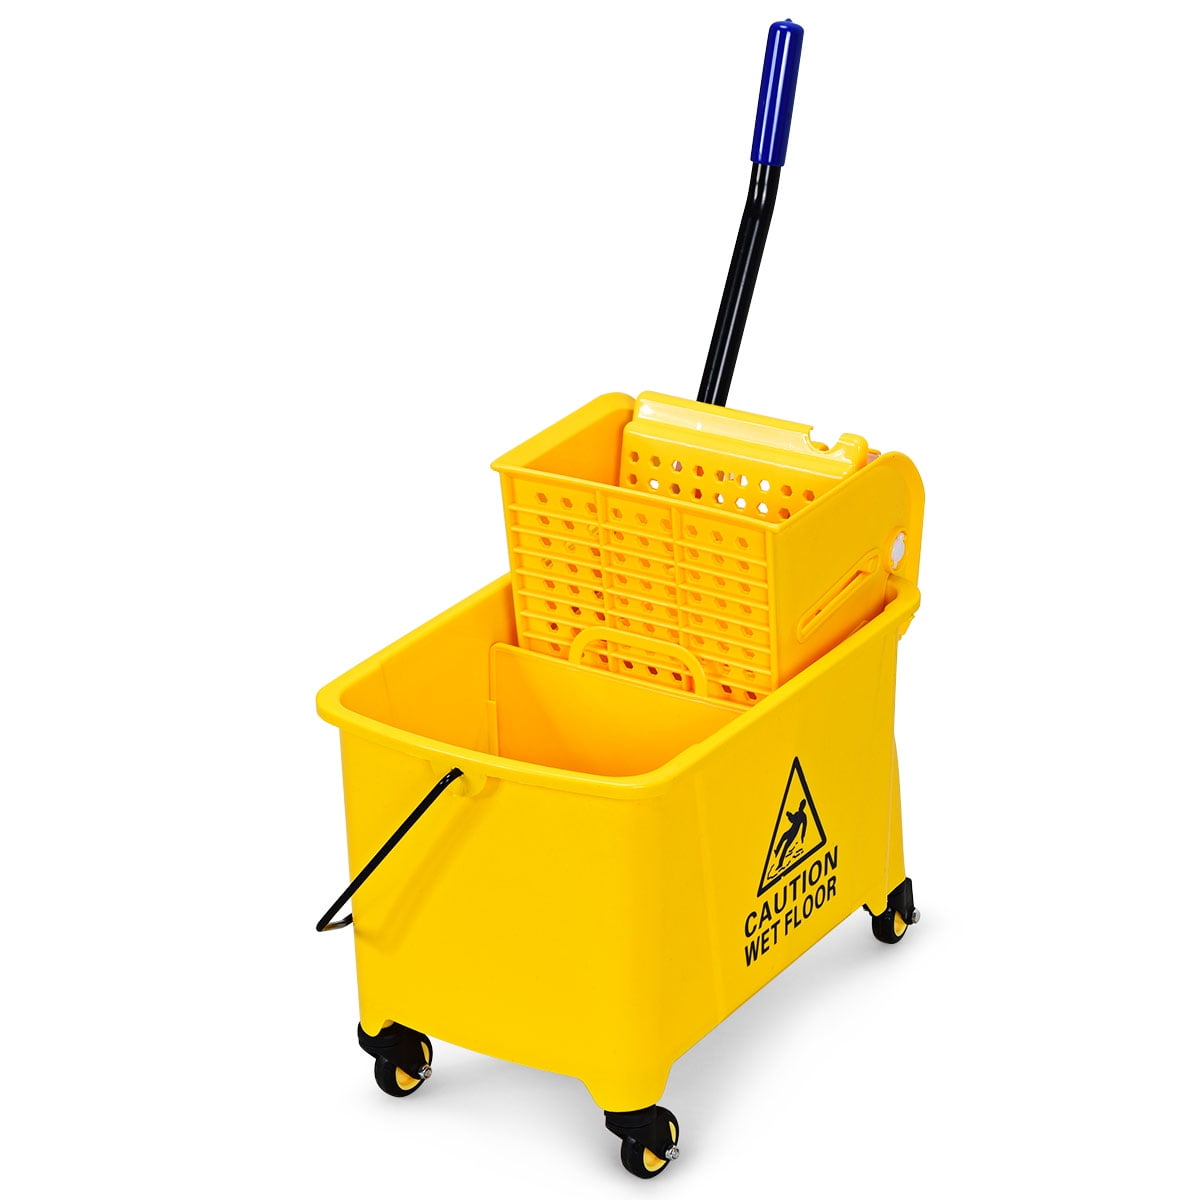 Details about   5.28 Gallon Mop Bucket with Wringer Combo Commercial Home Cleaning Cart US Stock 